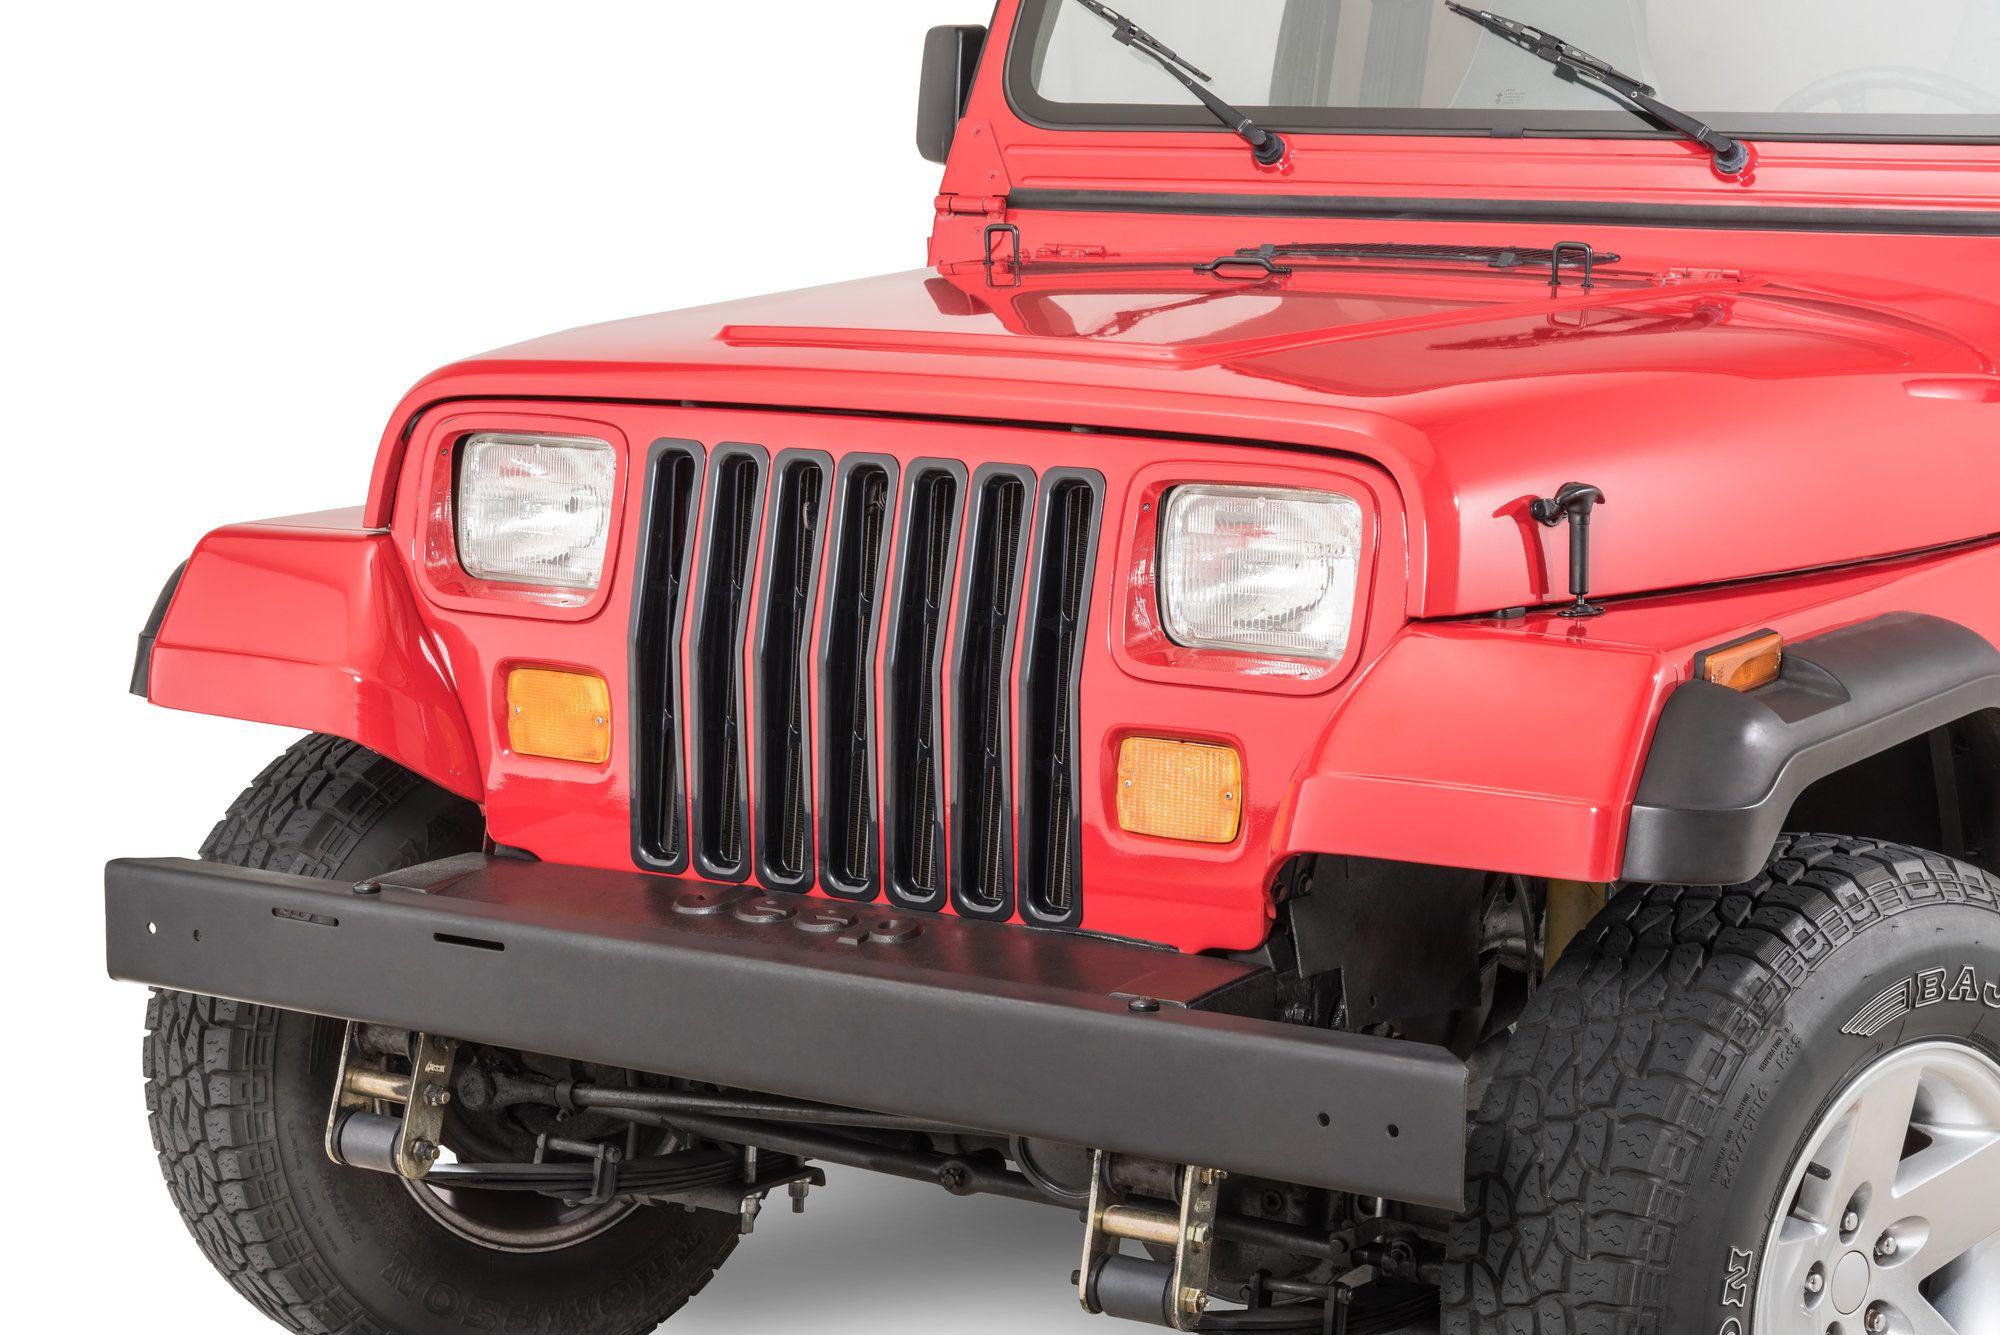 YJ Jeep Grill Logo - Rugged Ridge Plastic Grill Inserts For 87 95 Jeep Wrangler YJ